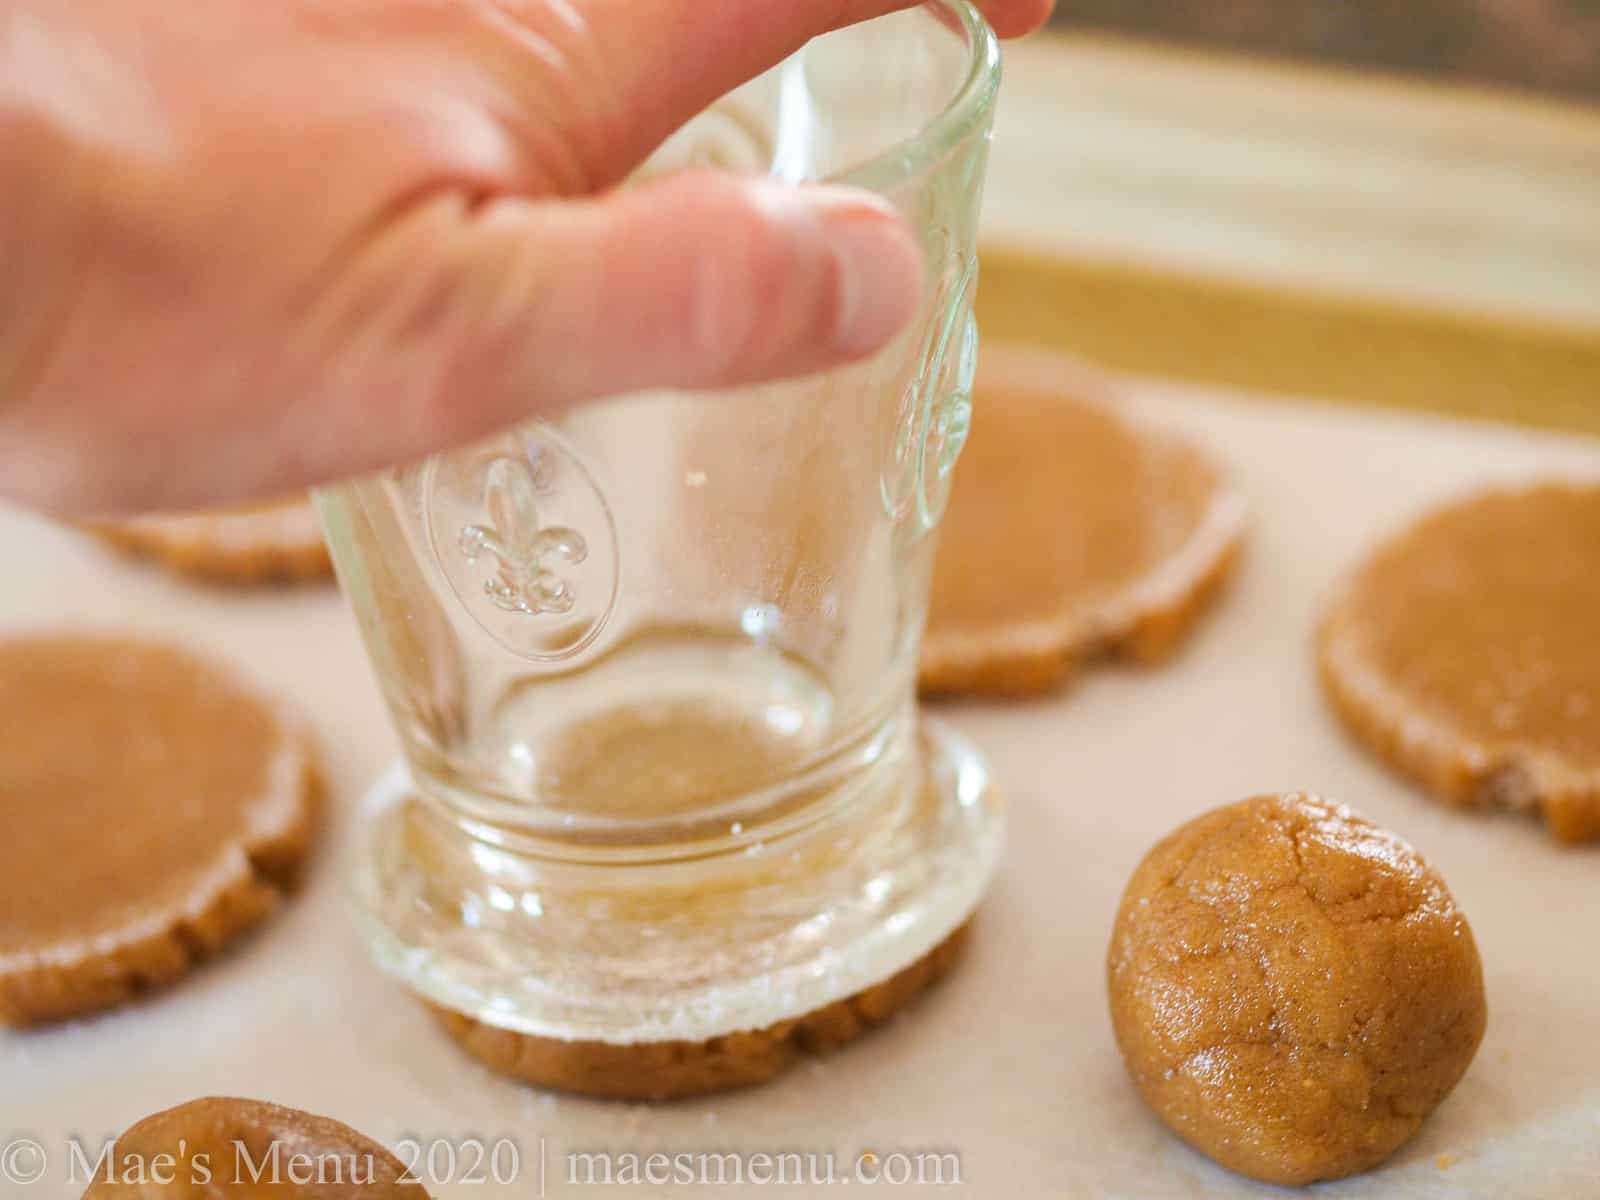 A hand holding a drinking glass and gently pressing down on peanut butter cookies